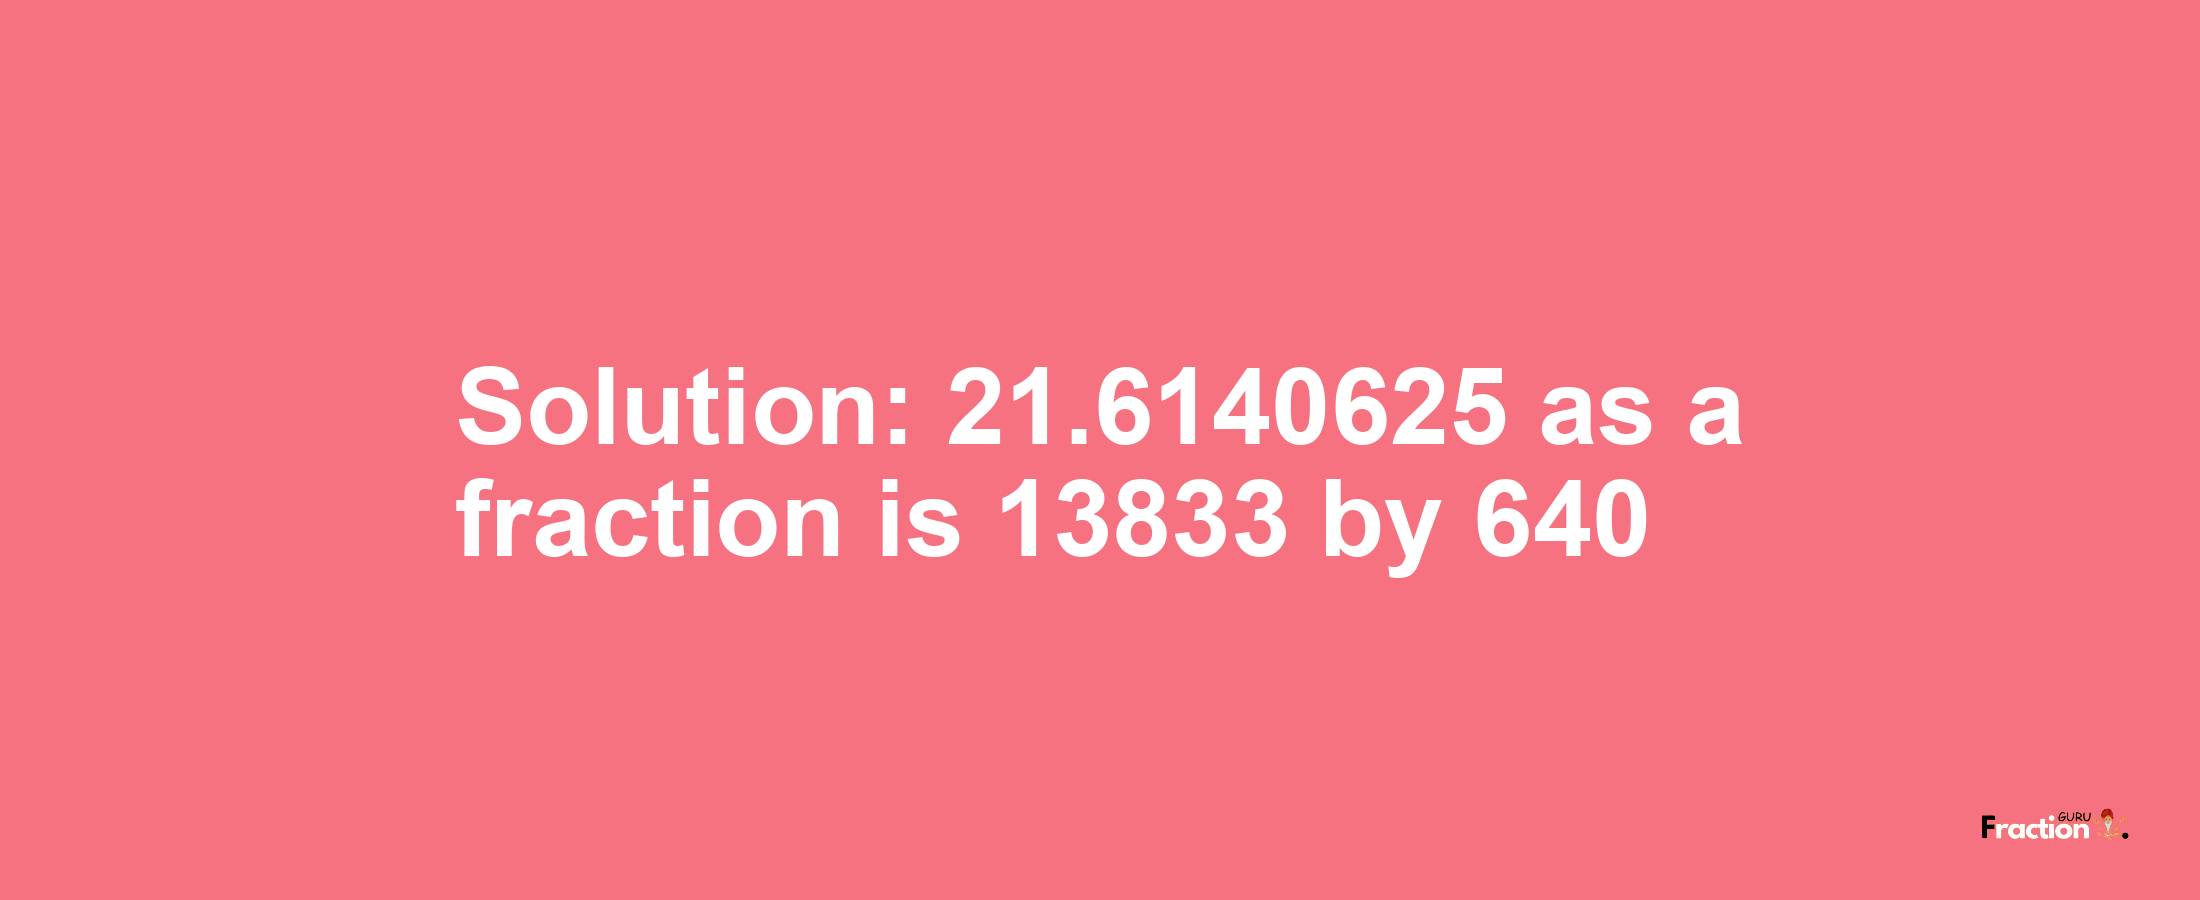 Solution:21.6140625 as a fraction is 13833/640